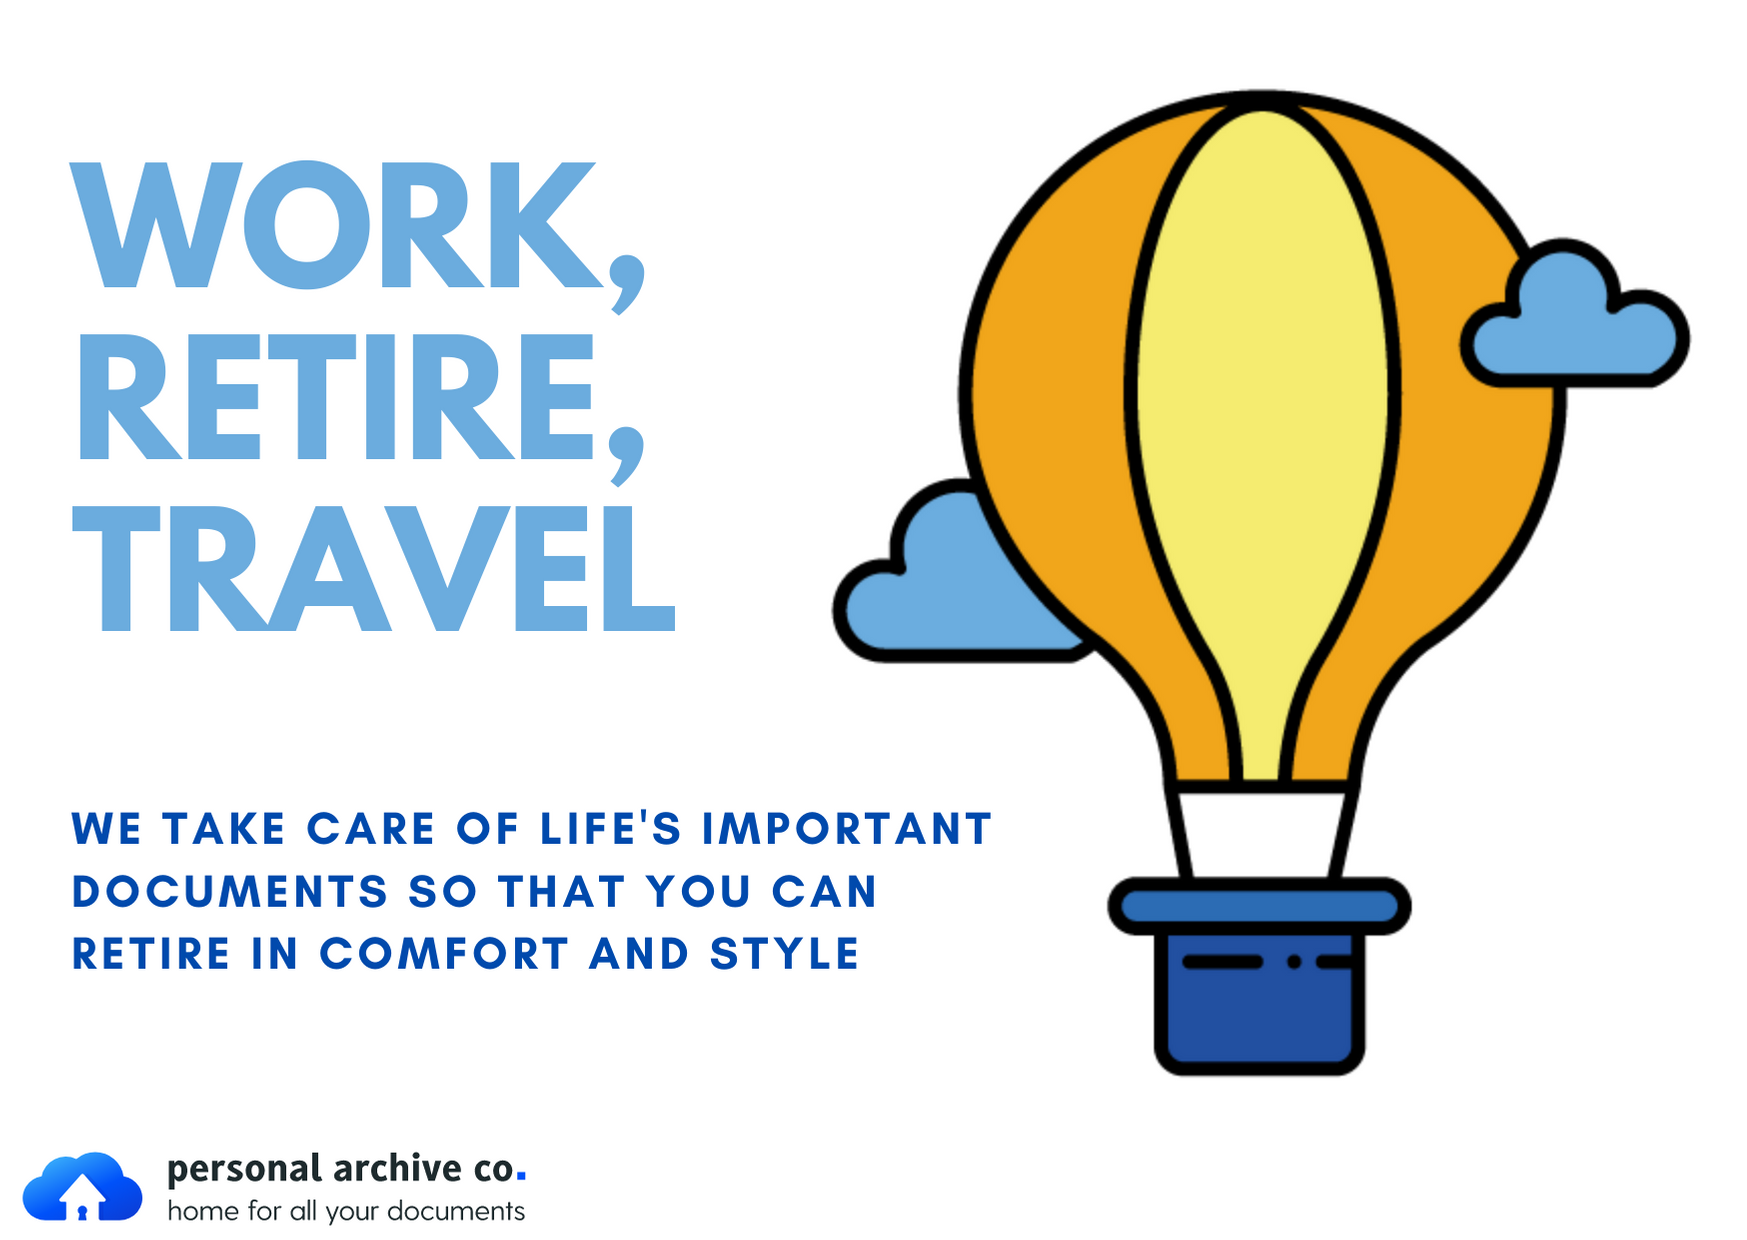 Work, Retire and Travel. Made easy by the online file storage solution